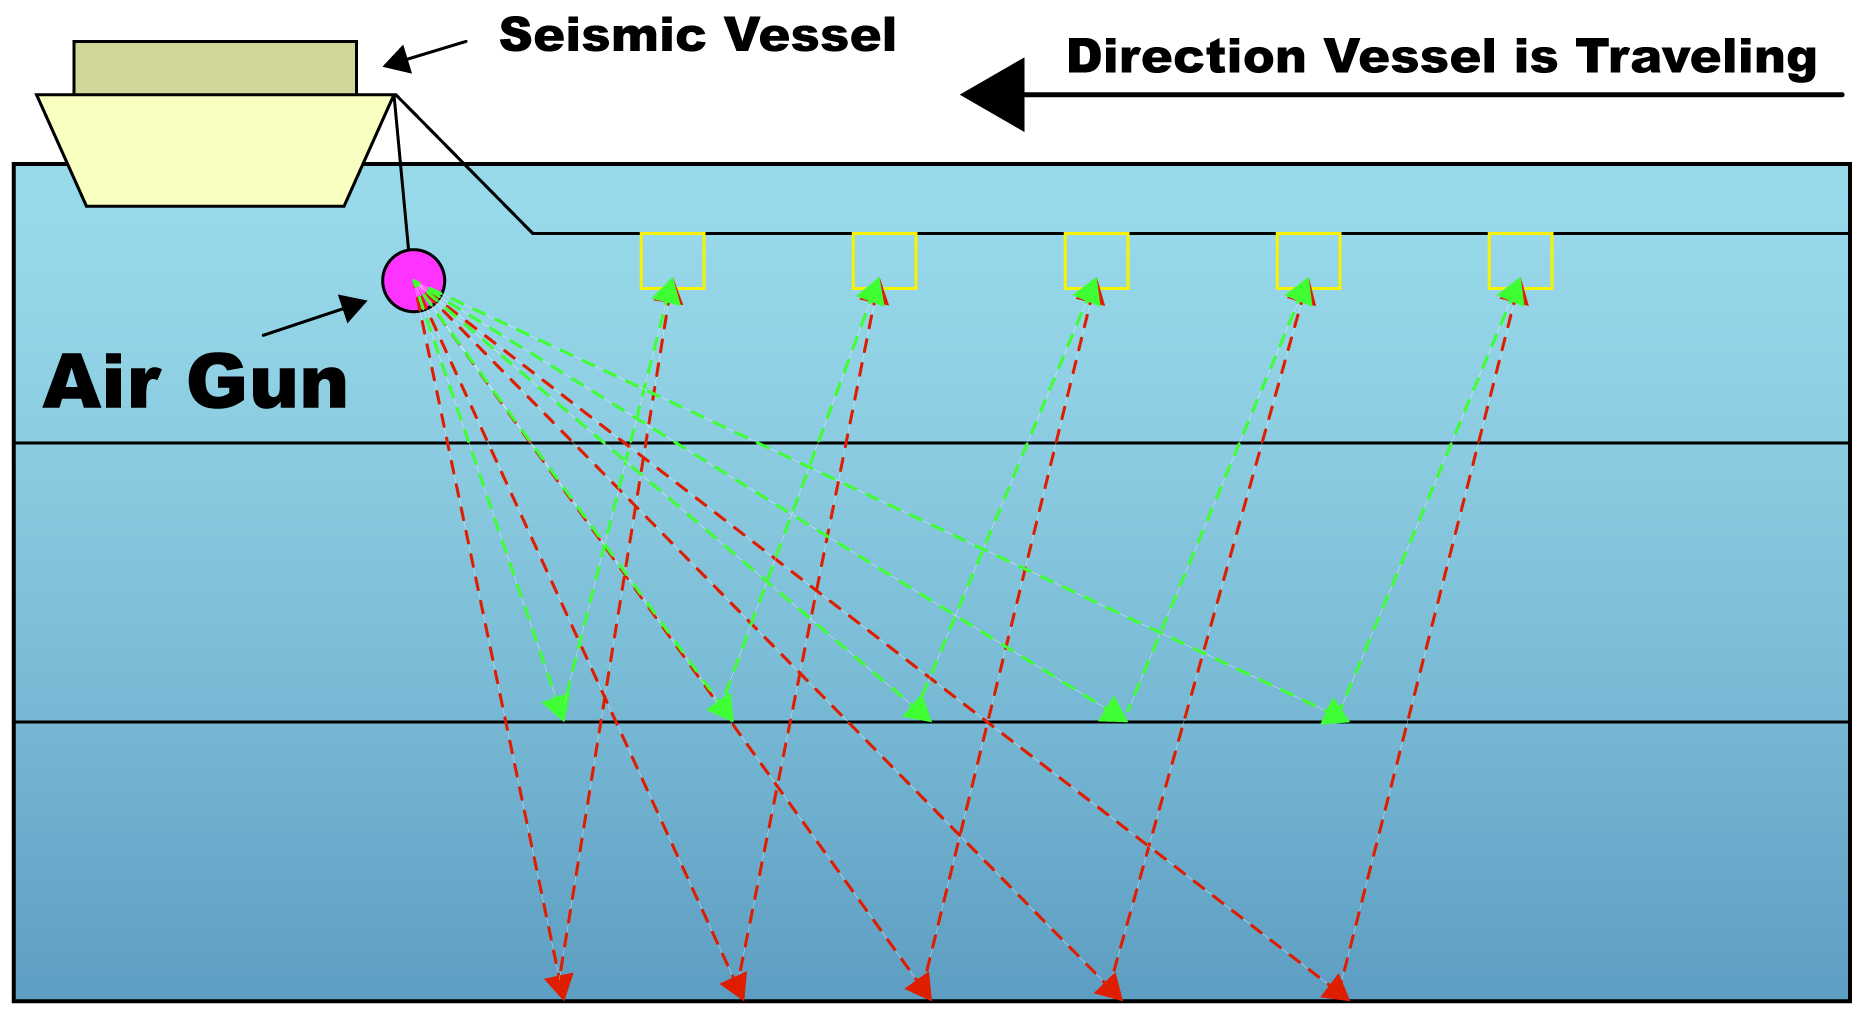 Offshore Seismic Surveying graphic